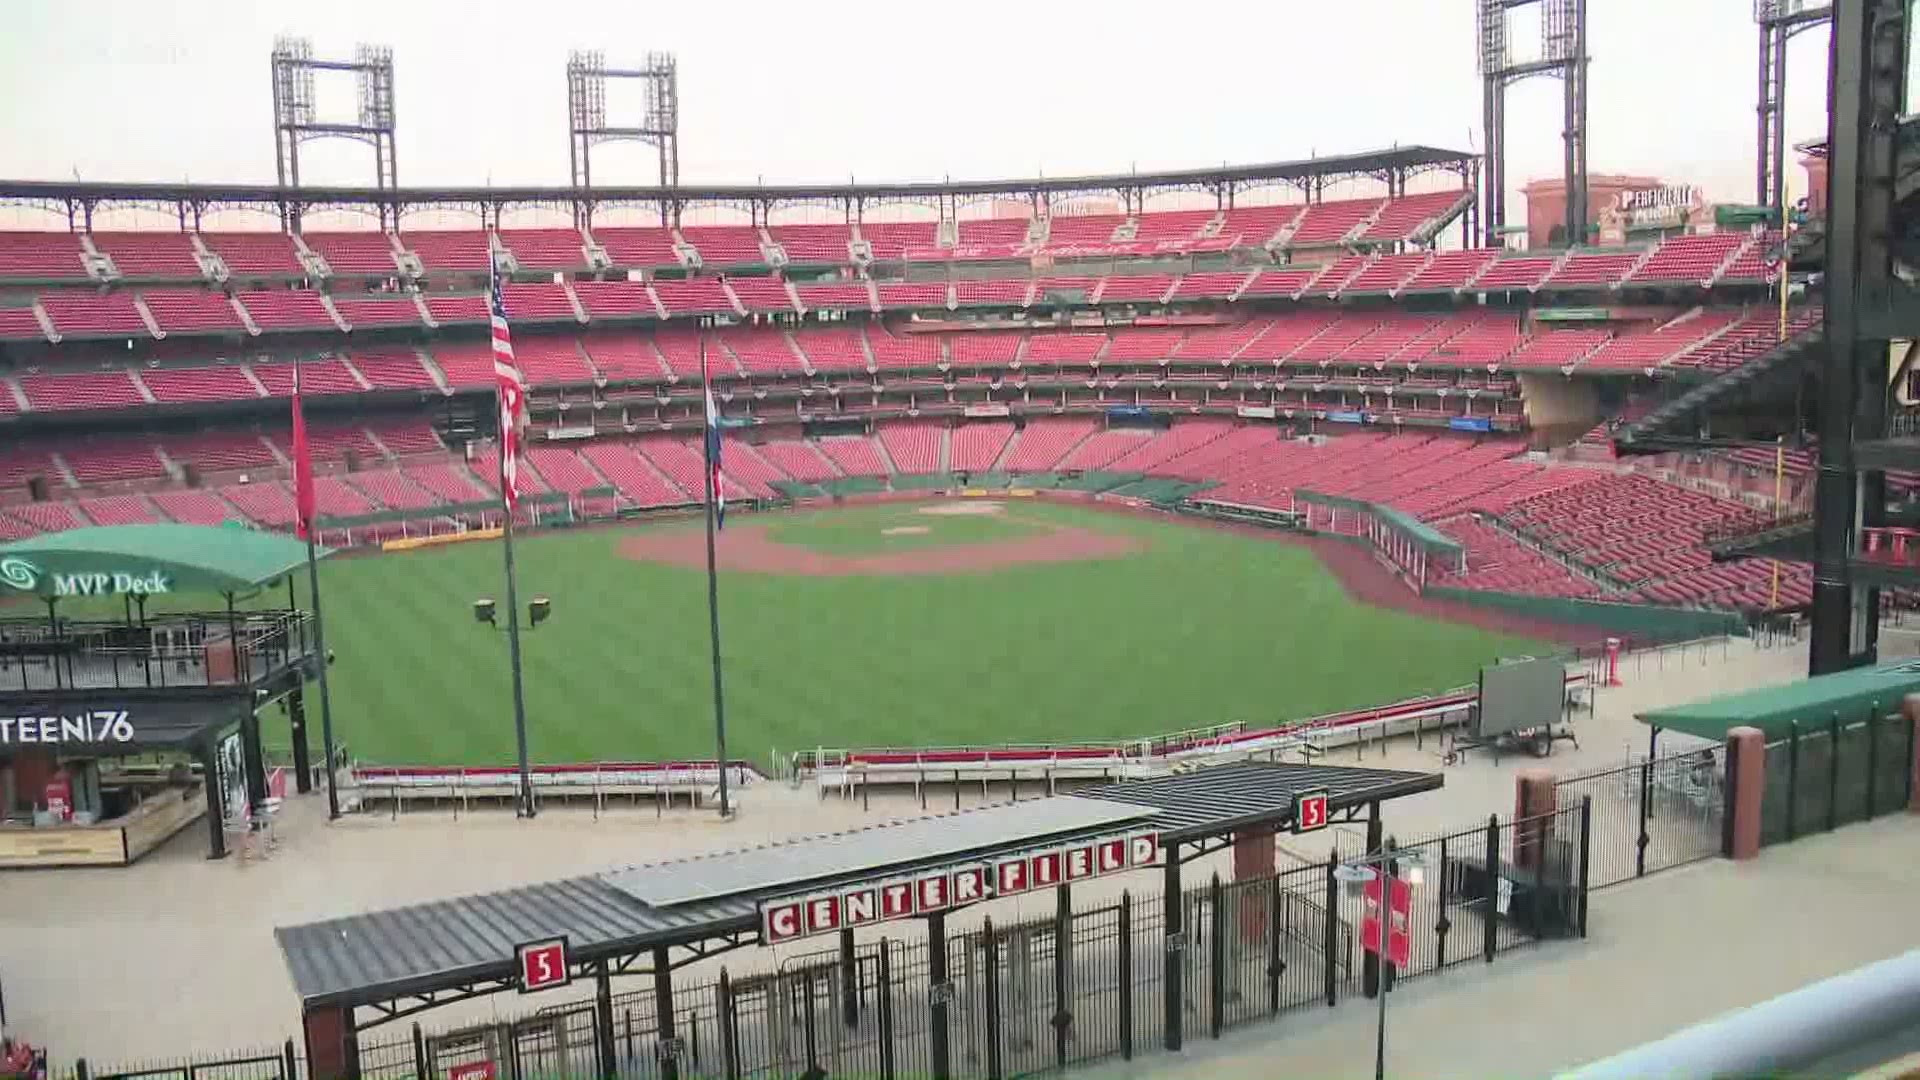 Budweiser Brew House Bud Deck Rooftop overlooks Busch Stadium and even comes with a food and drink package - with safe social distance measures in place.